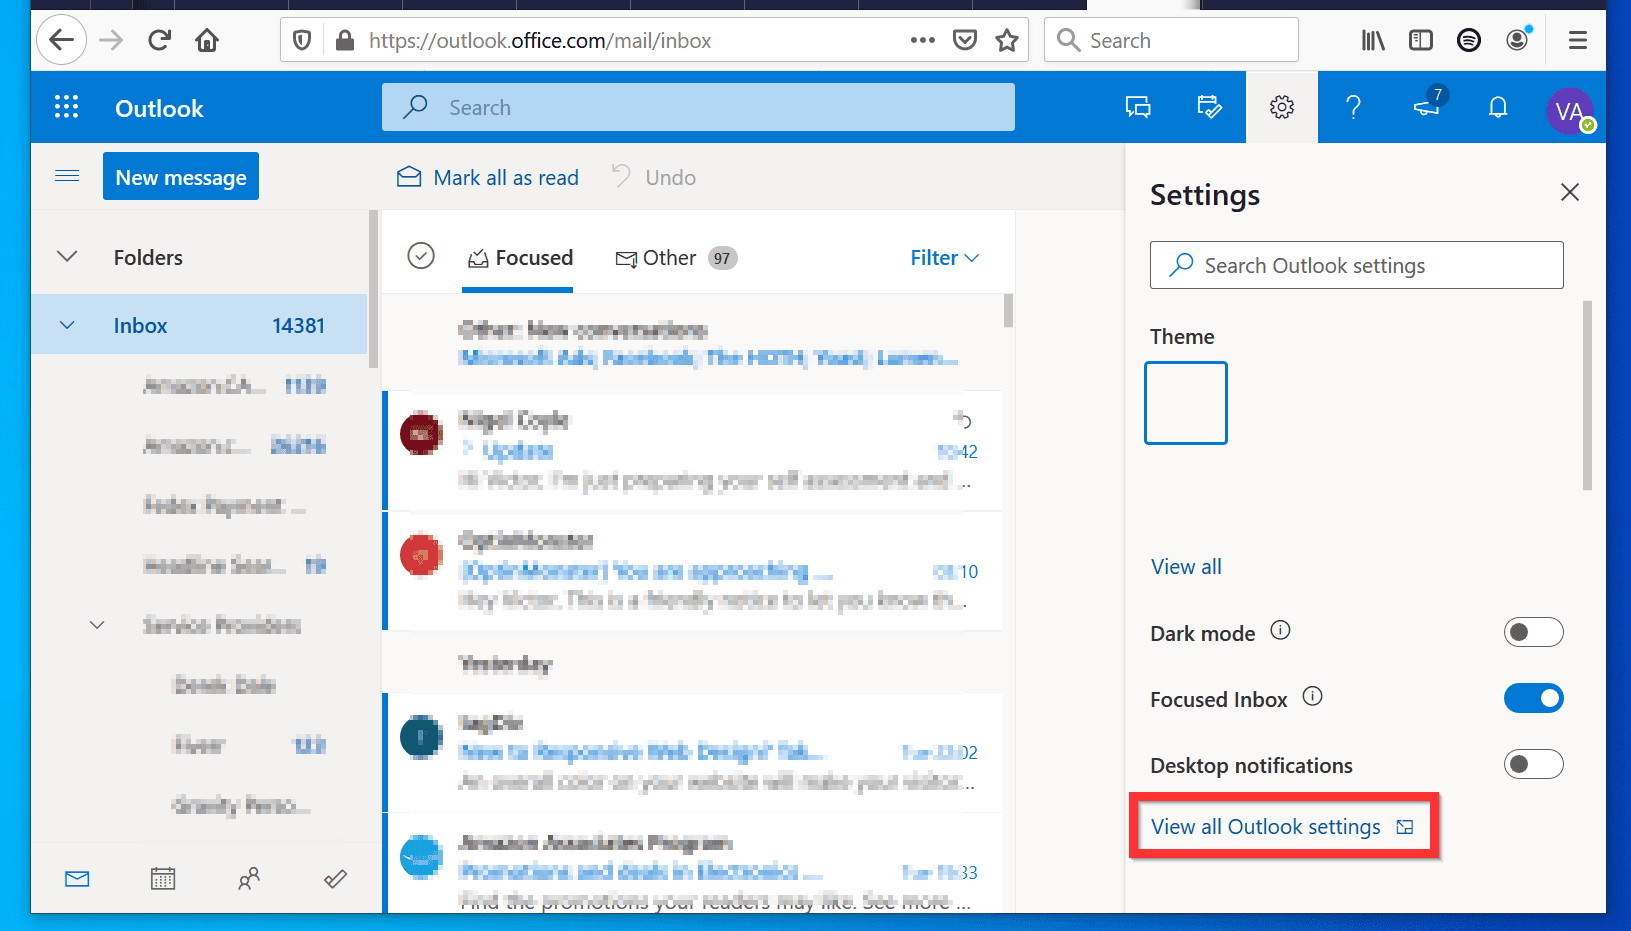 how to create add images to email signatures in outlook office 365